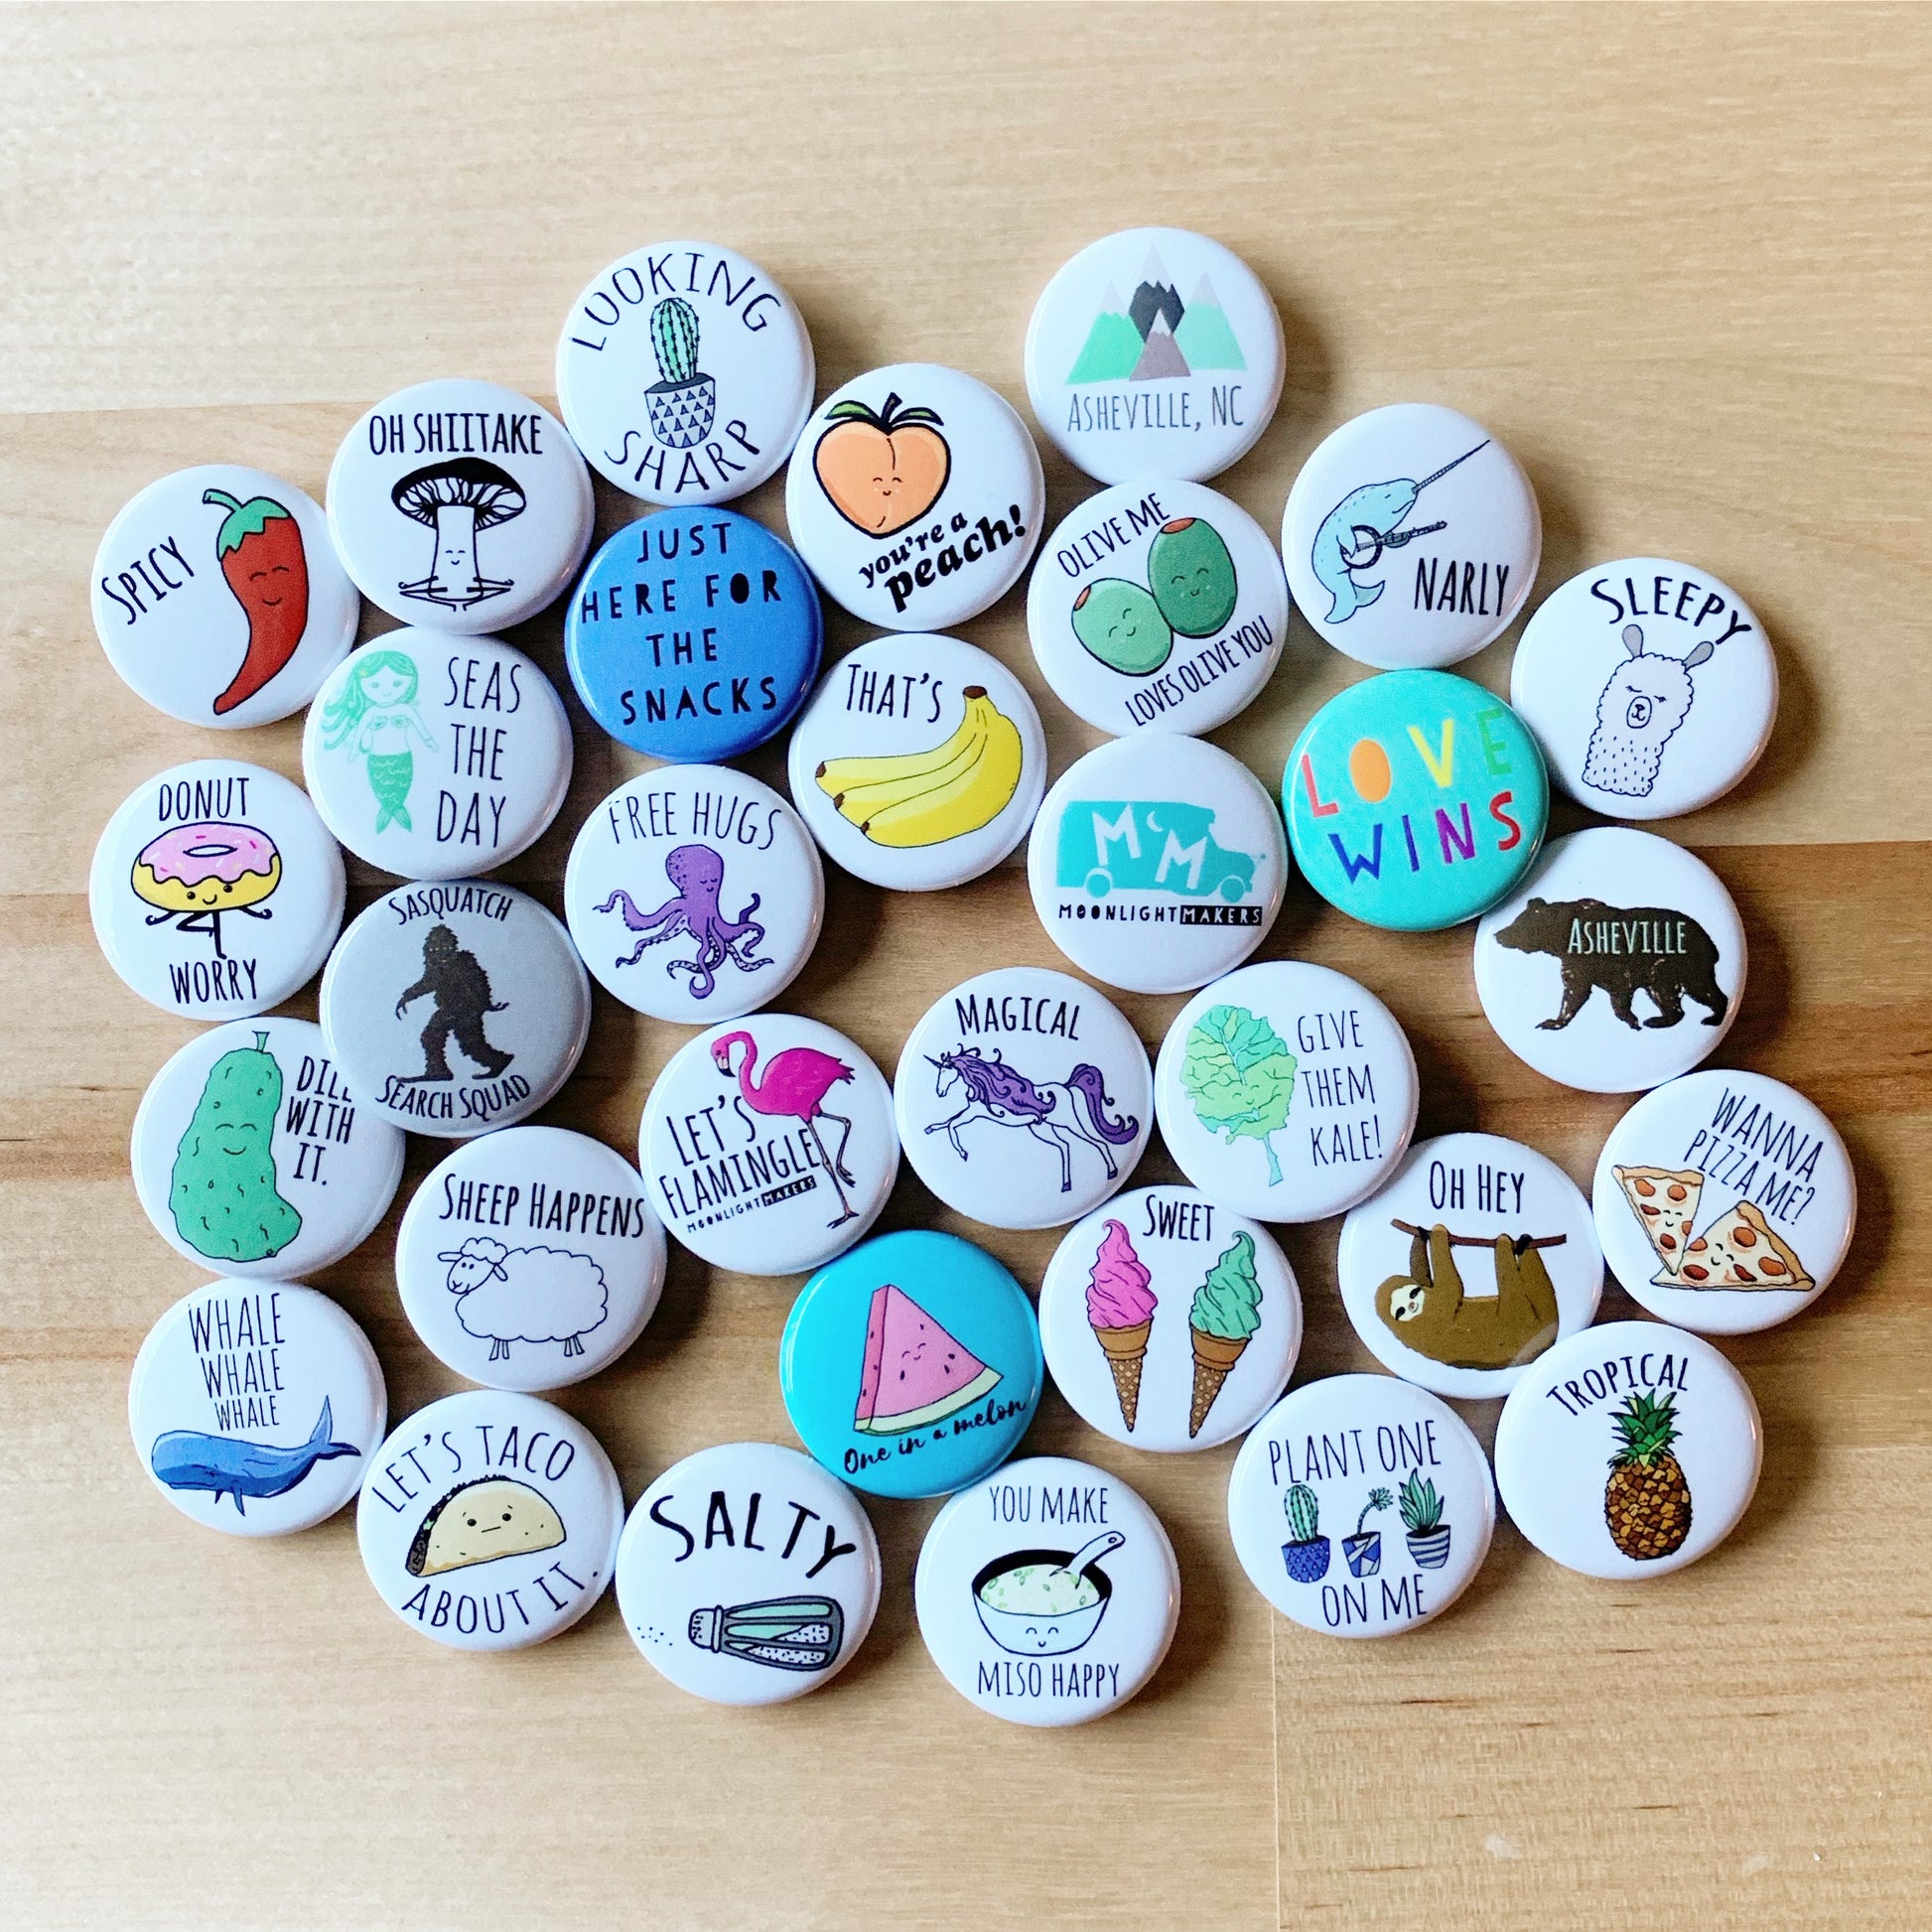 Choose 5 1 Pins - Mix and Match from Selection